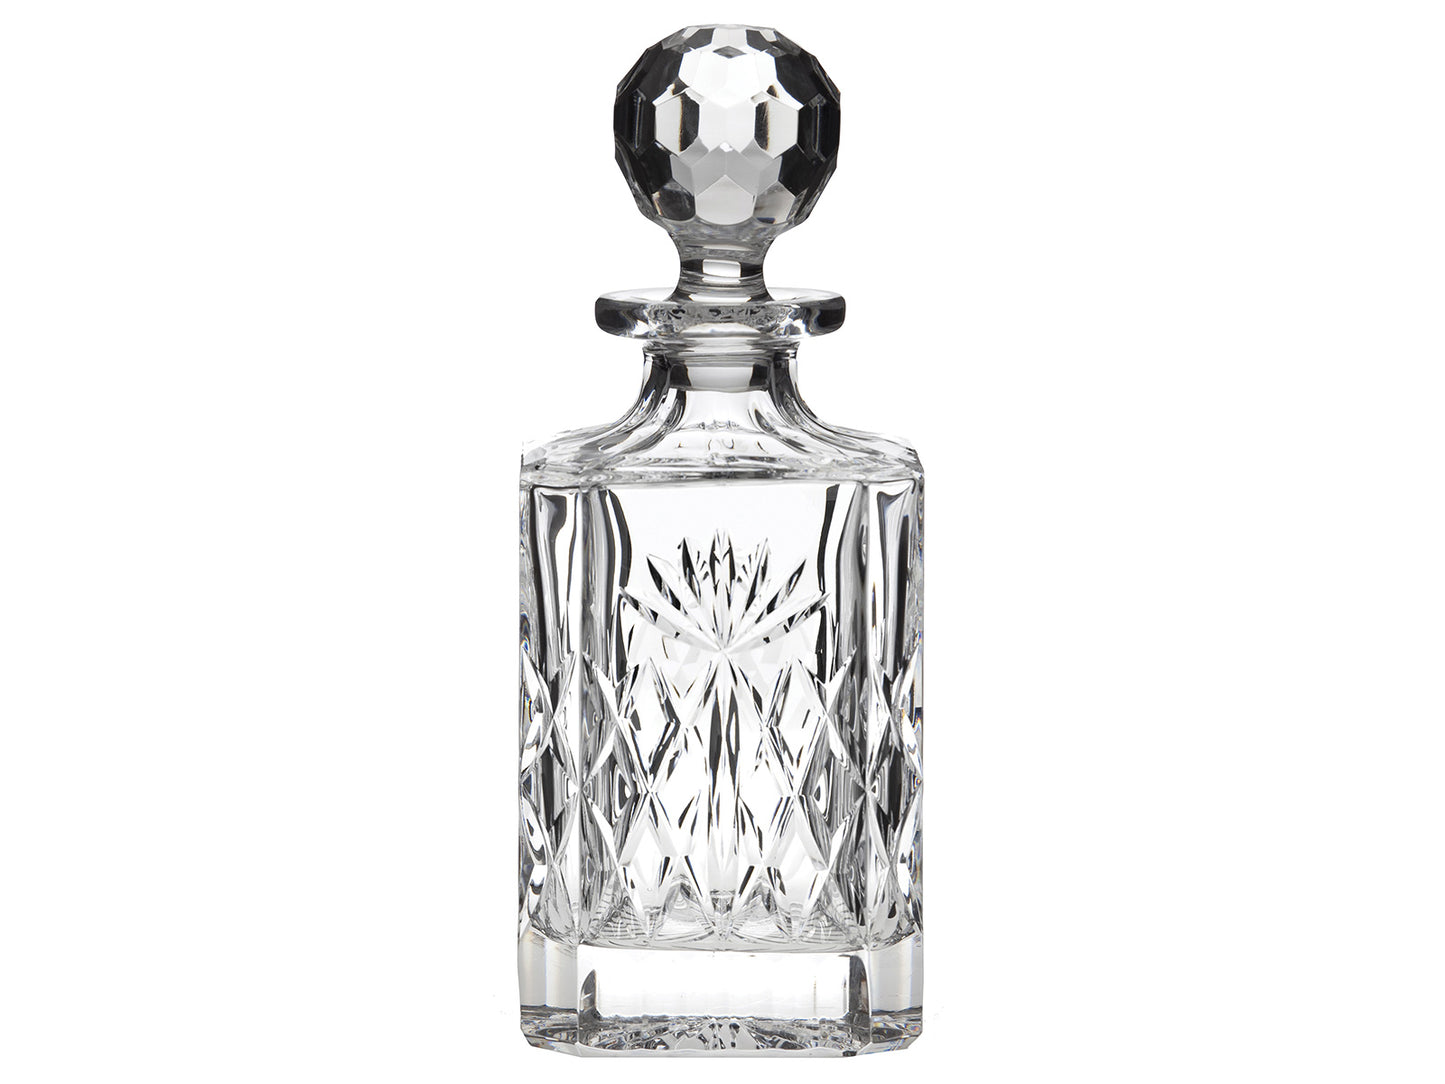 A crystal decanter with a cut glass design around the outside, featuring a bed of diamonds around the base and a seven-pointed fan above it with a smooth top and golf-ball style stopper